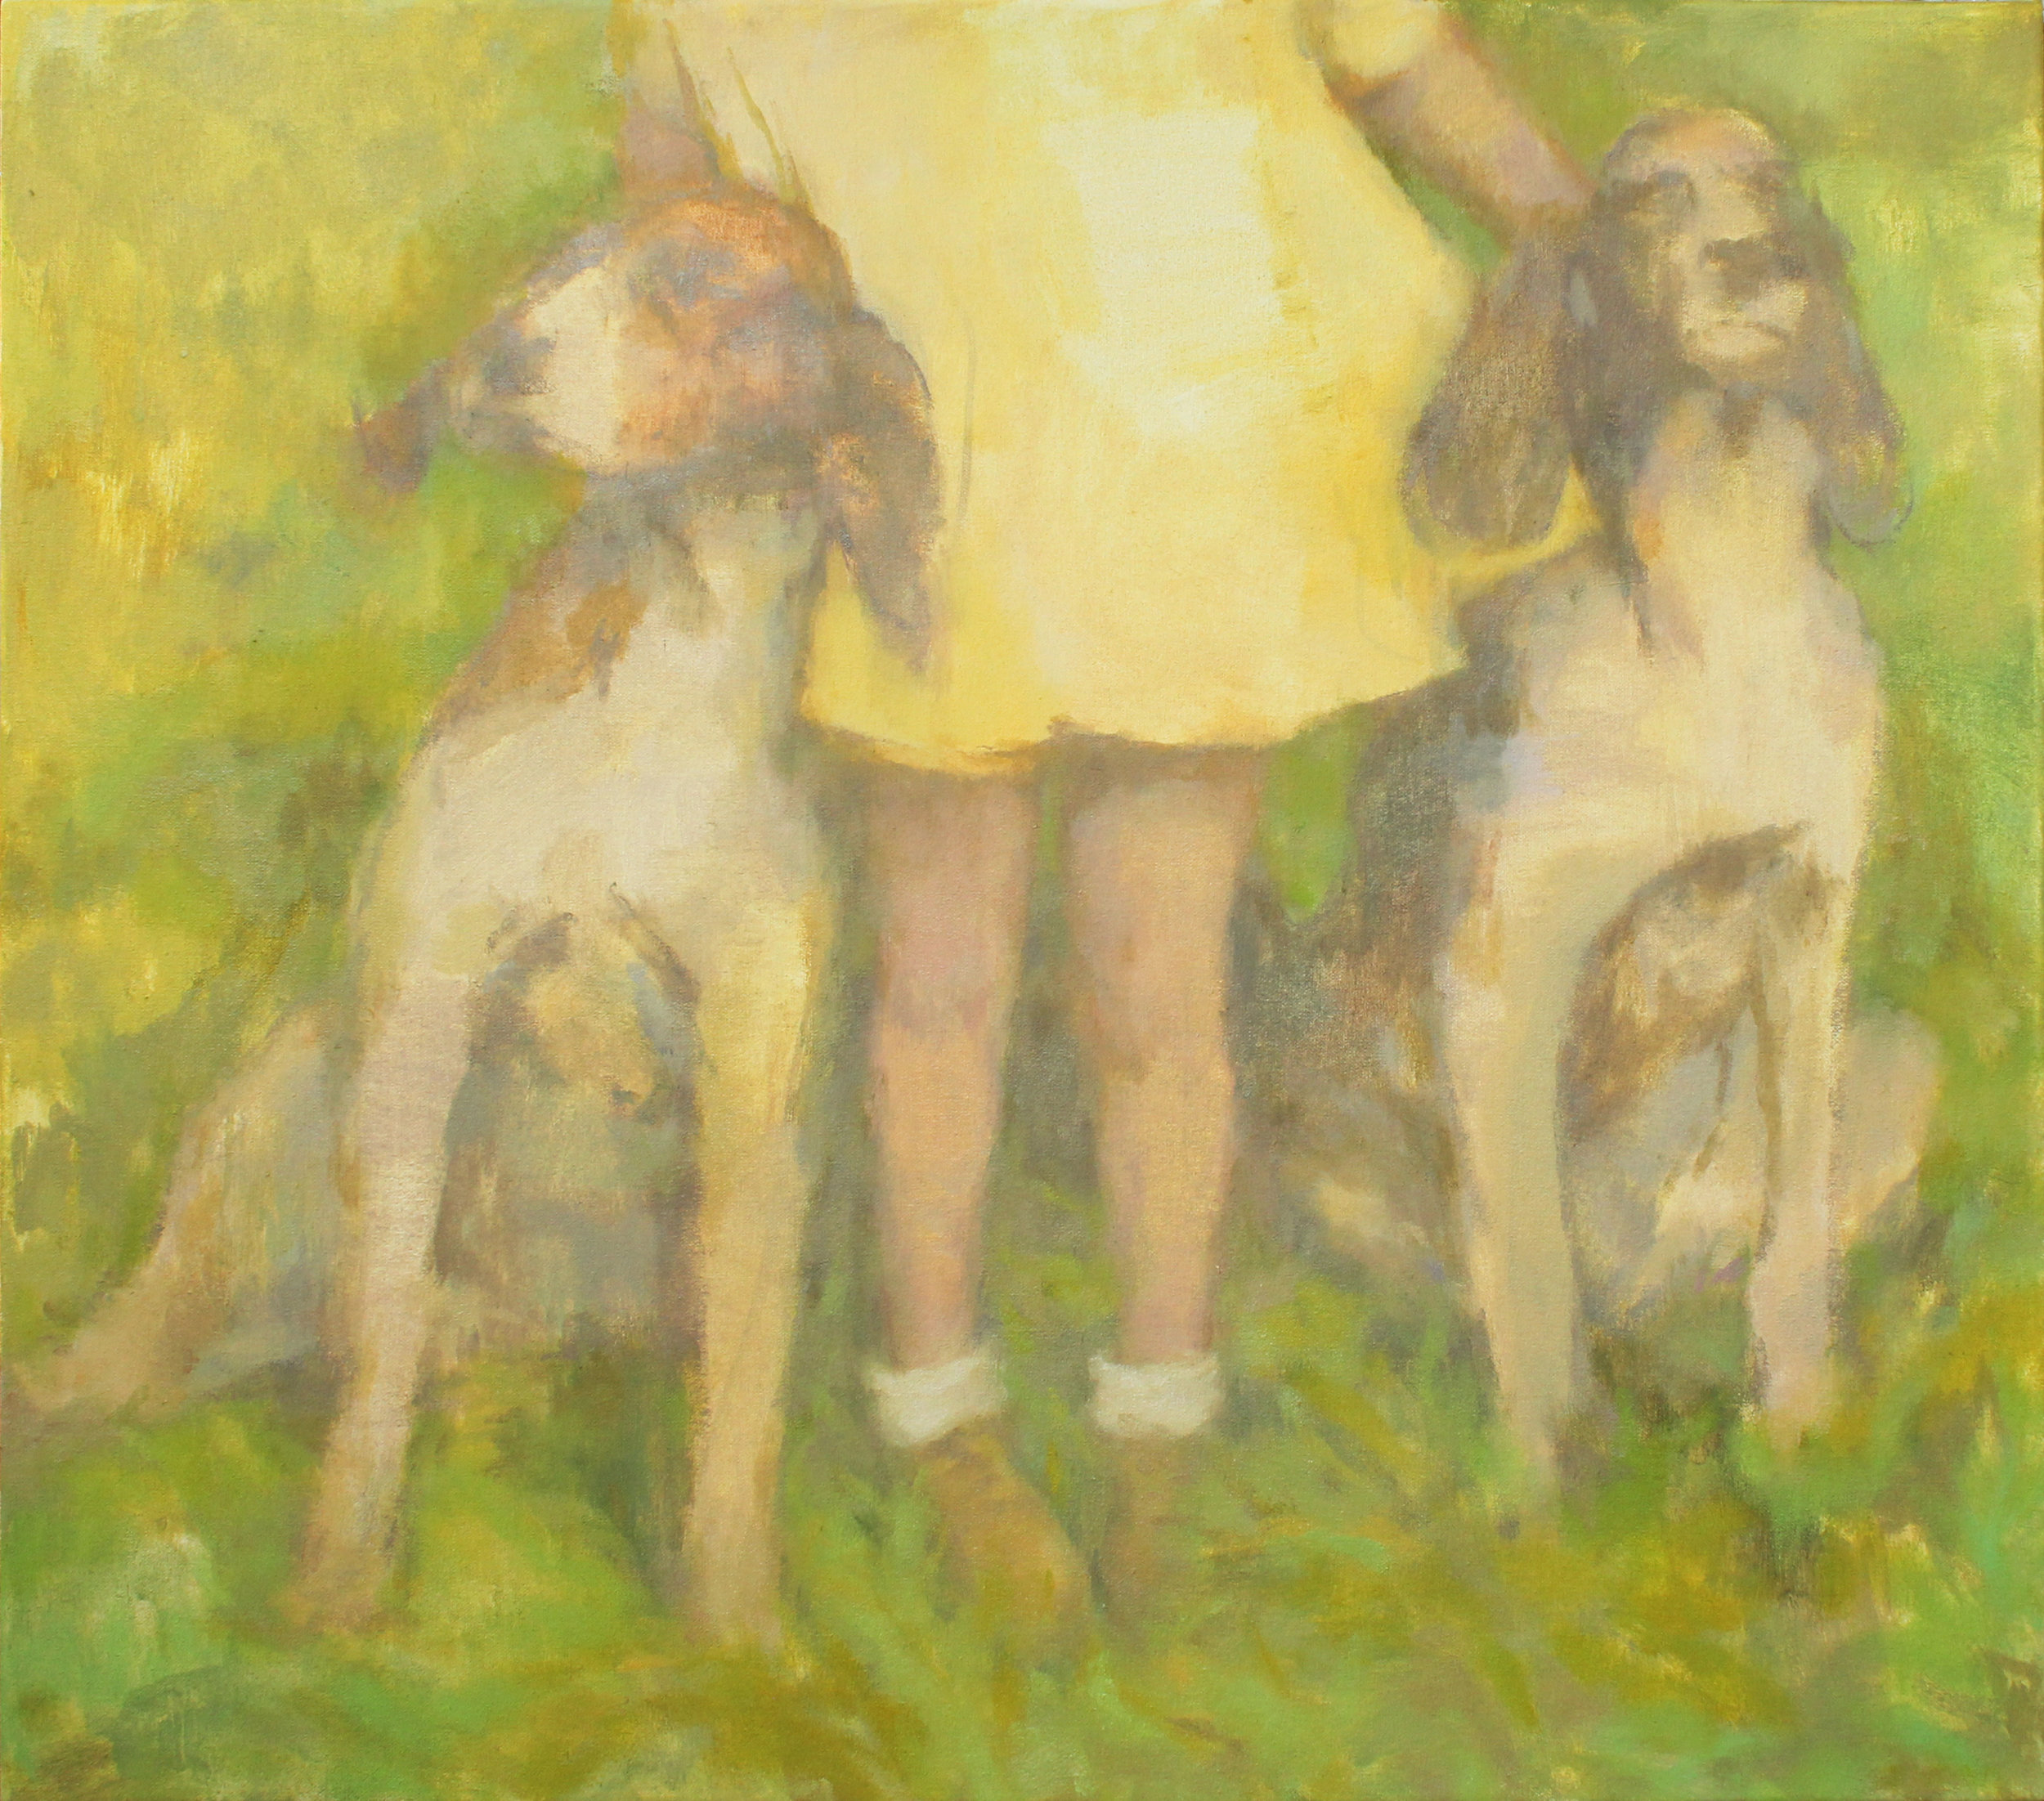    Yellow Dress, Tally-Ho   oil on canvas 24x28” 2019  private collection New Jersey 